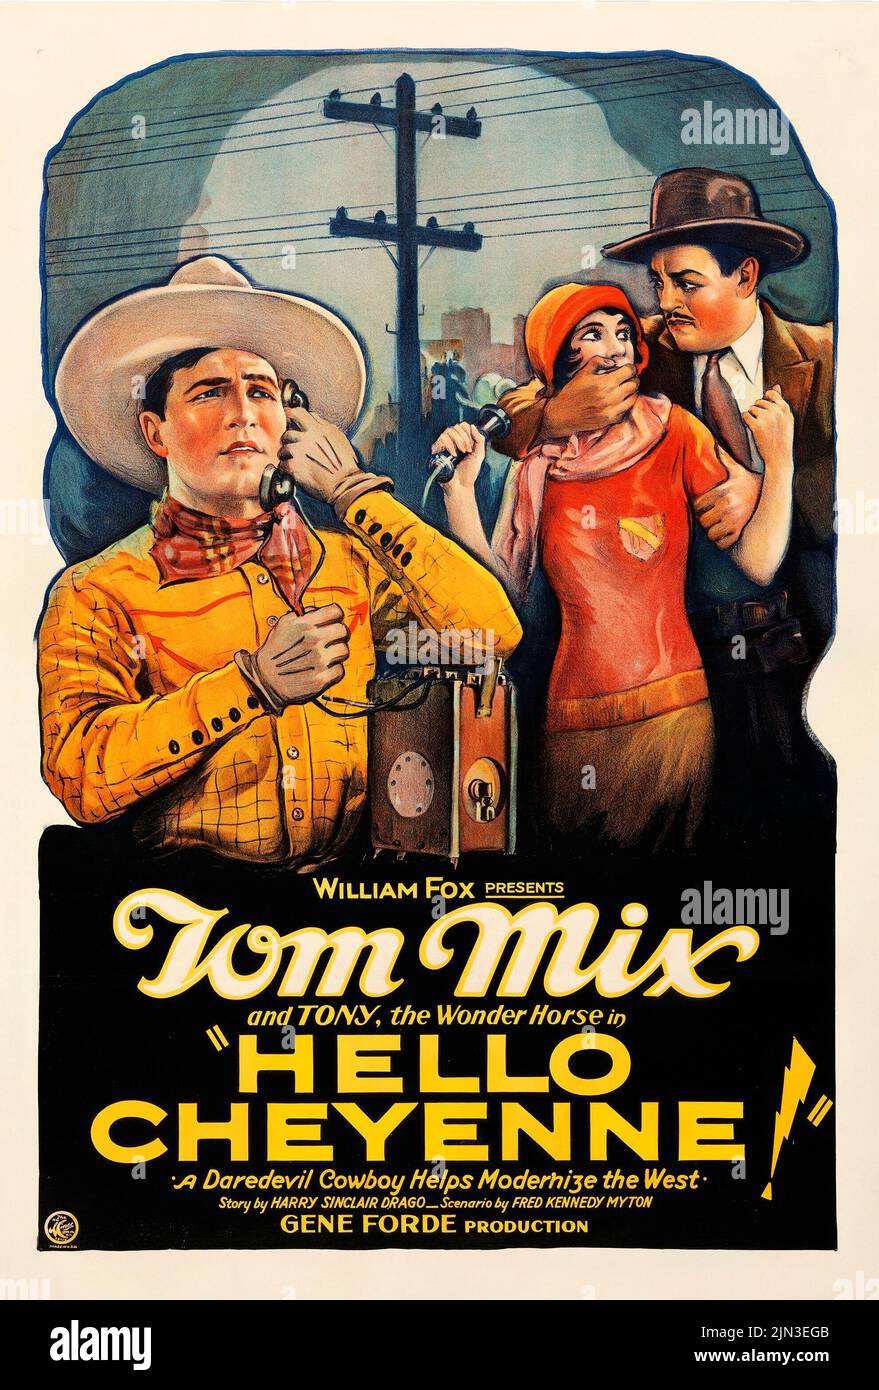 Vintage movie poster - Tom Mix and Tony the Wonder Horse in Hello Cheyenne! (Fox, 1928) Stock Photo